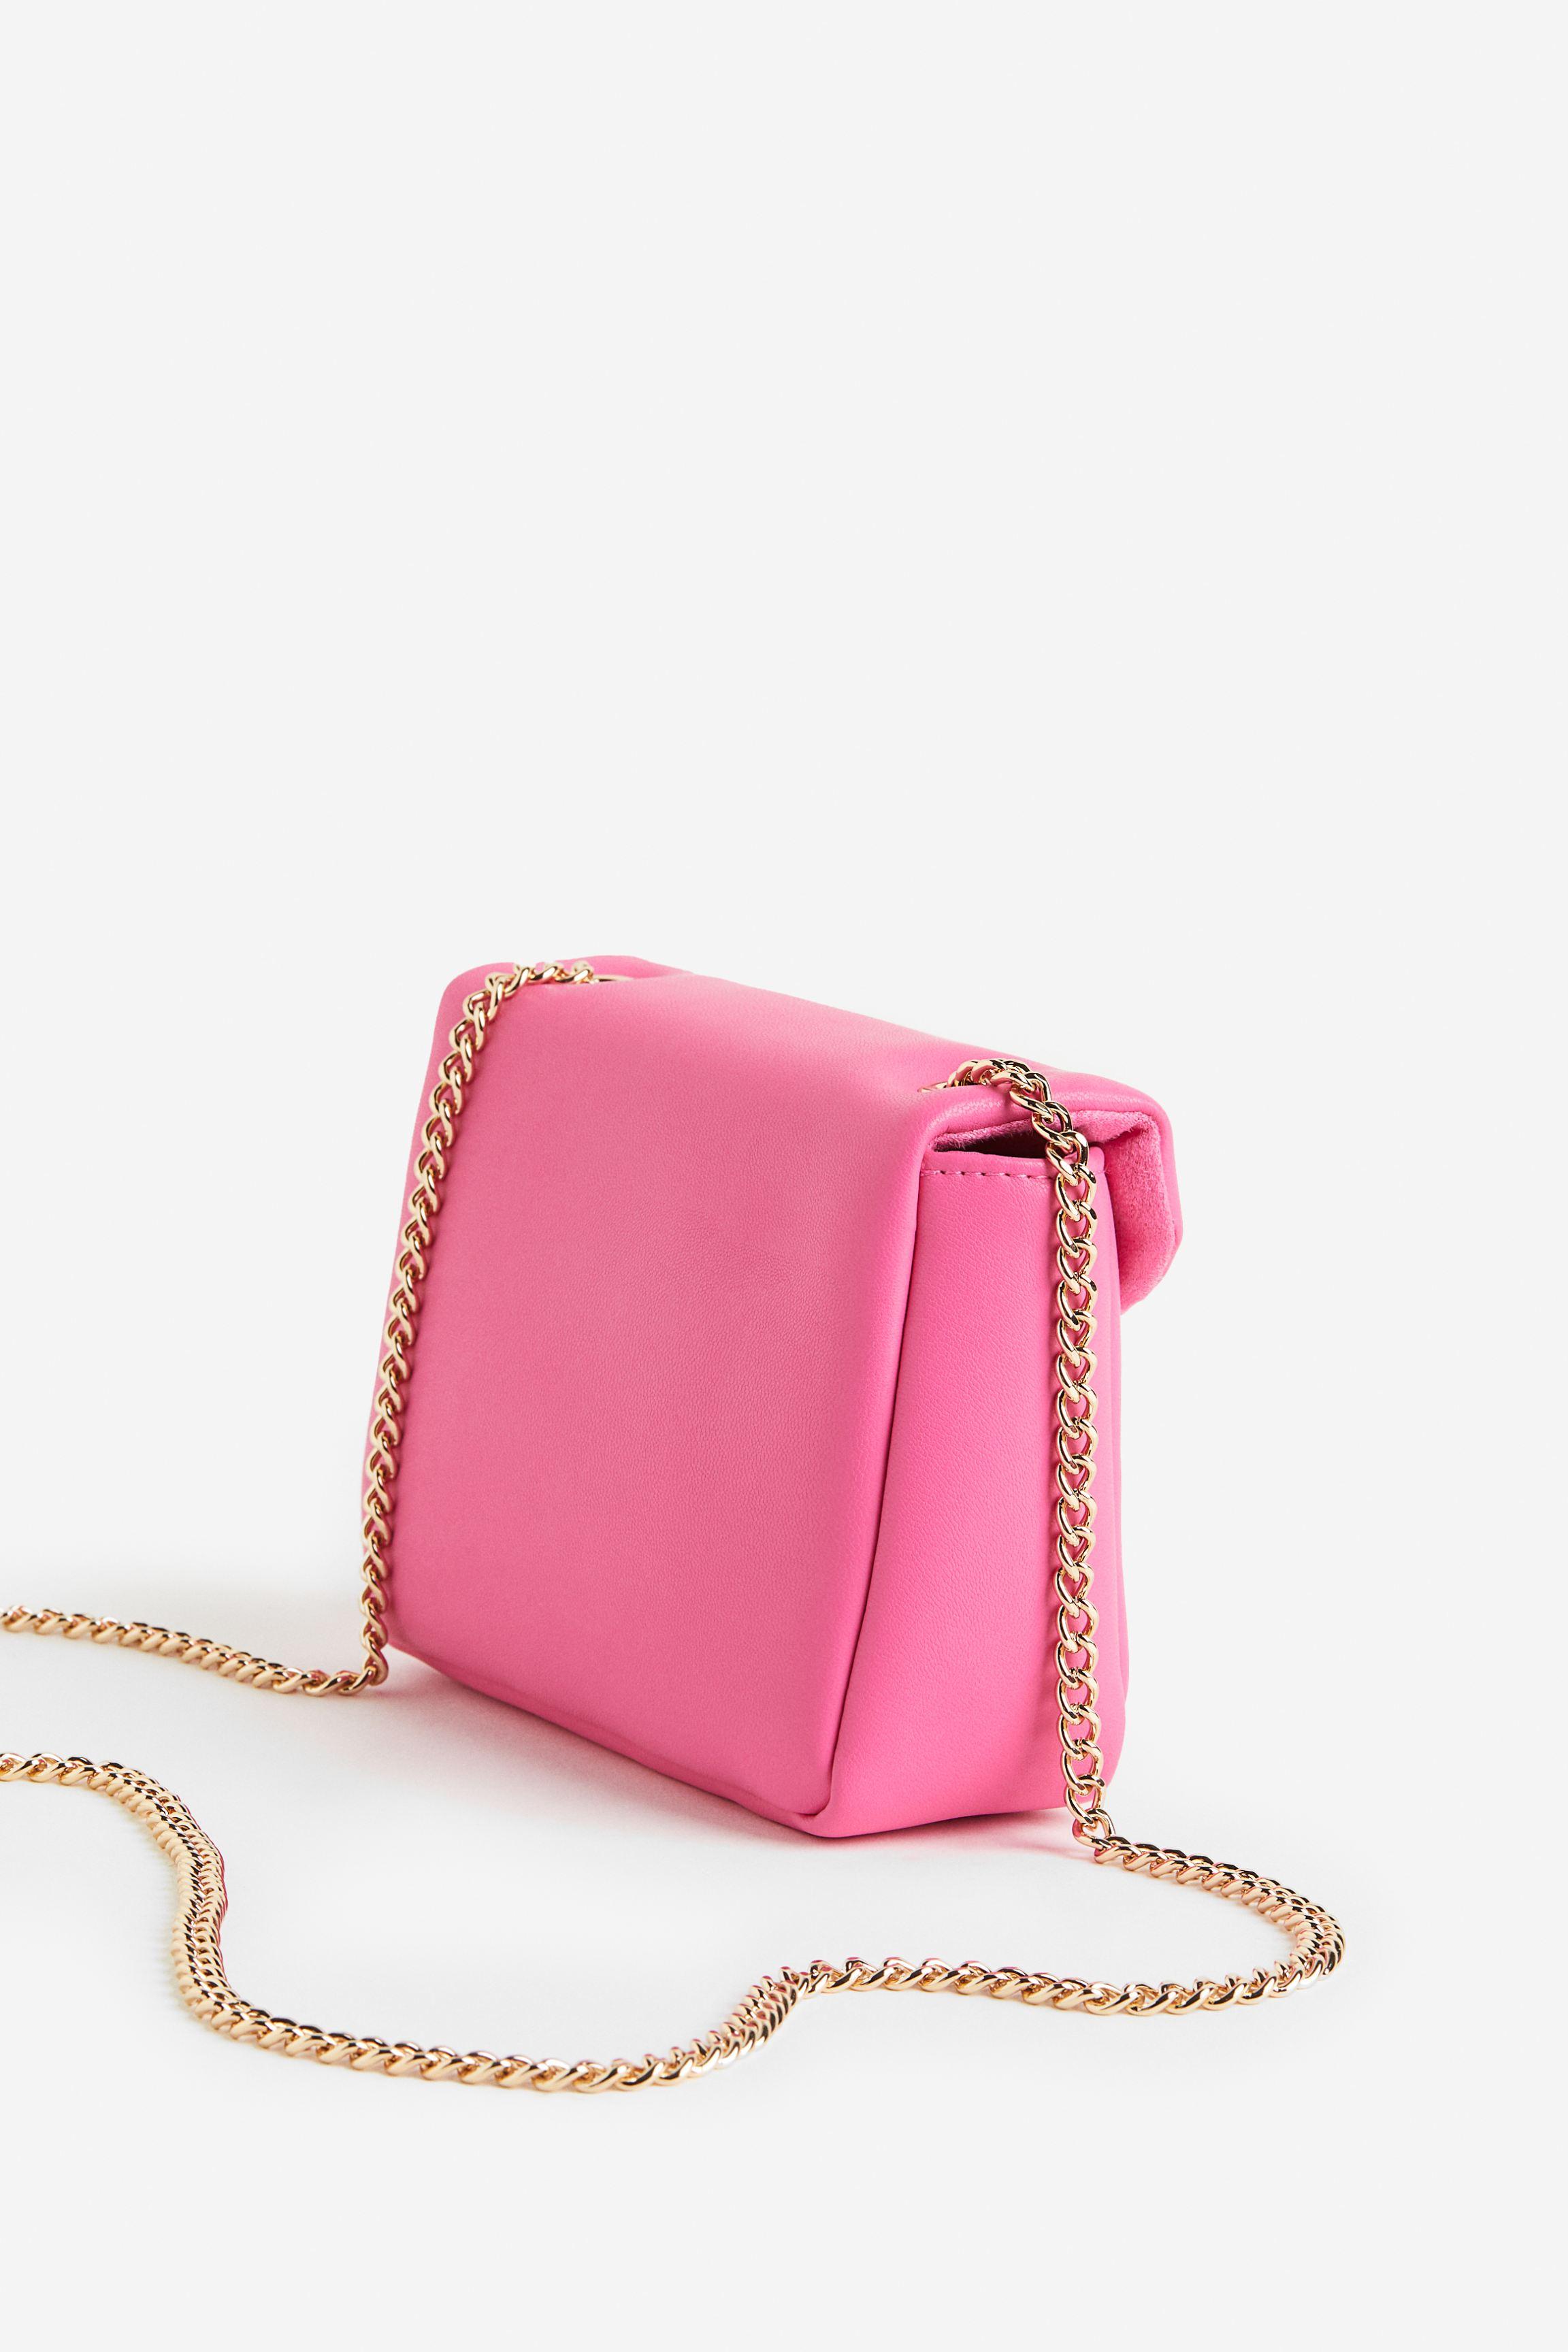 H&M Bag in Pink | Lyst